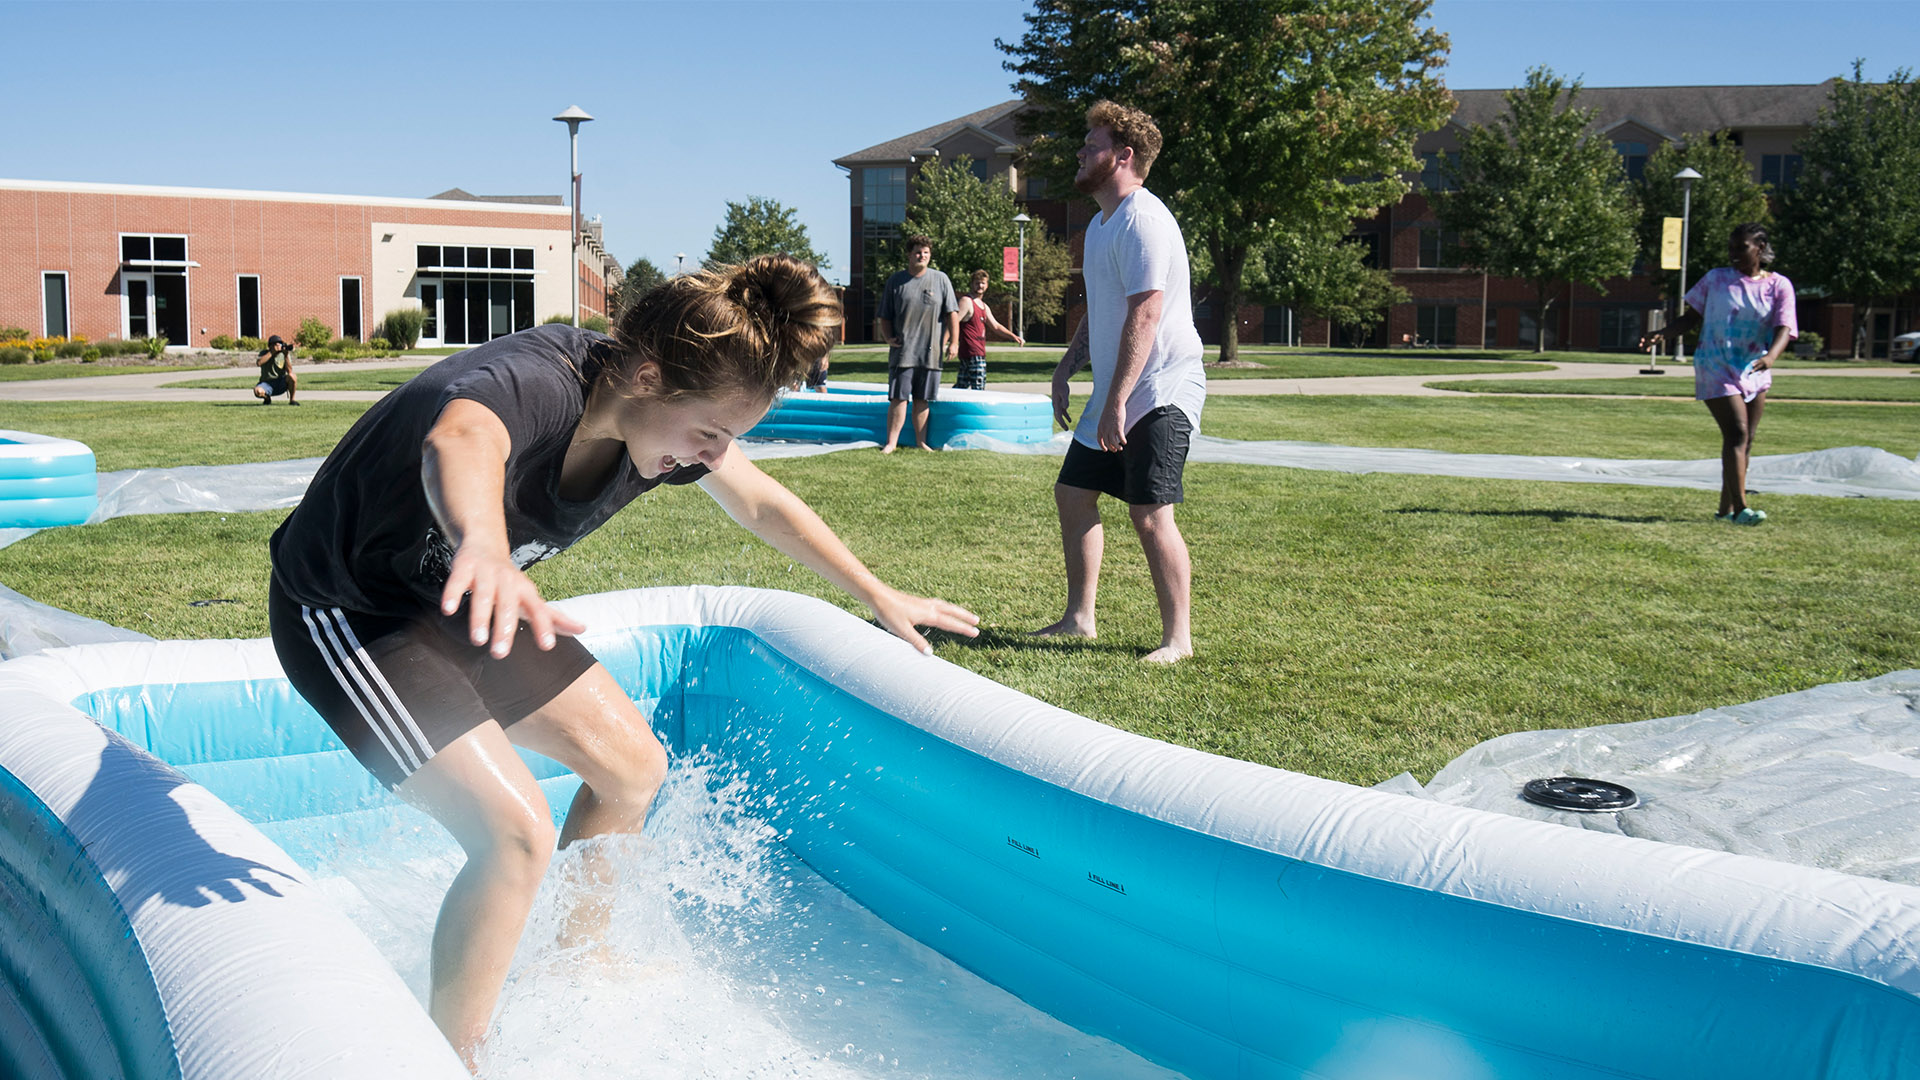 Students spend Welcome Week getting to know campus and one another through a variety of activities.